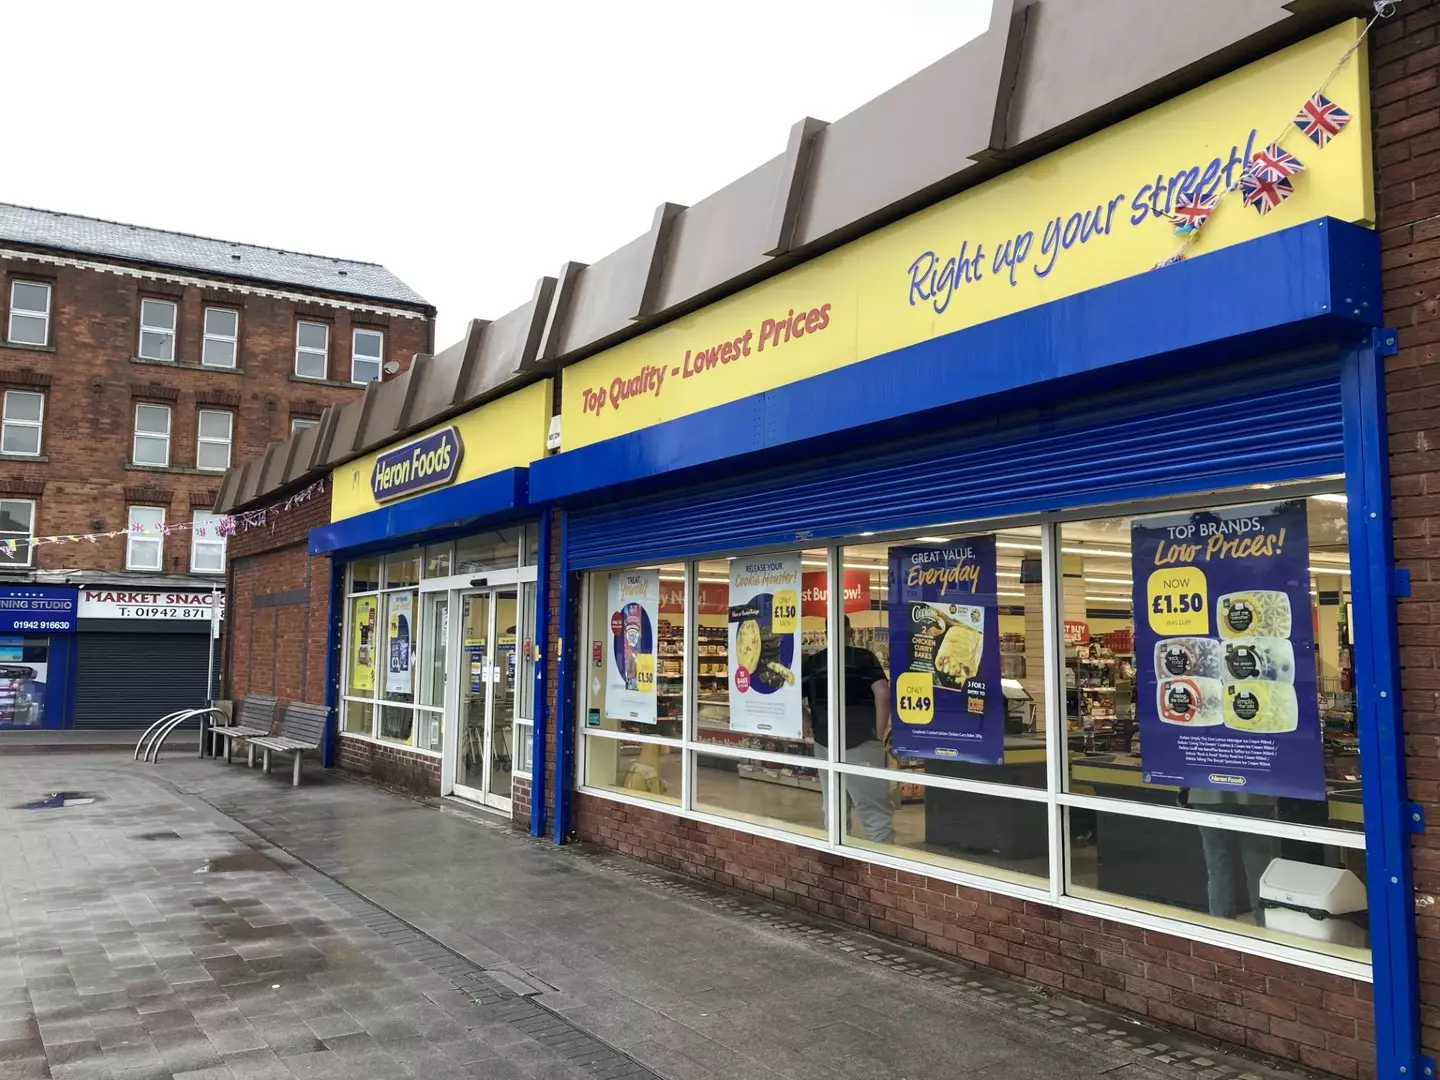 Heron Foods store pictured in Manchester.